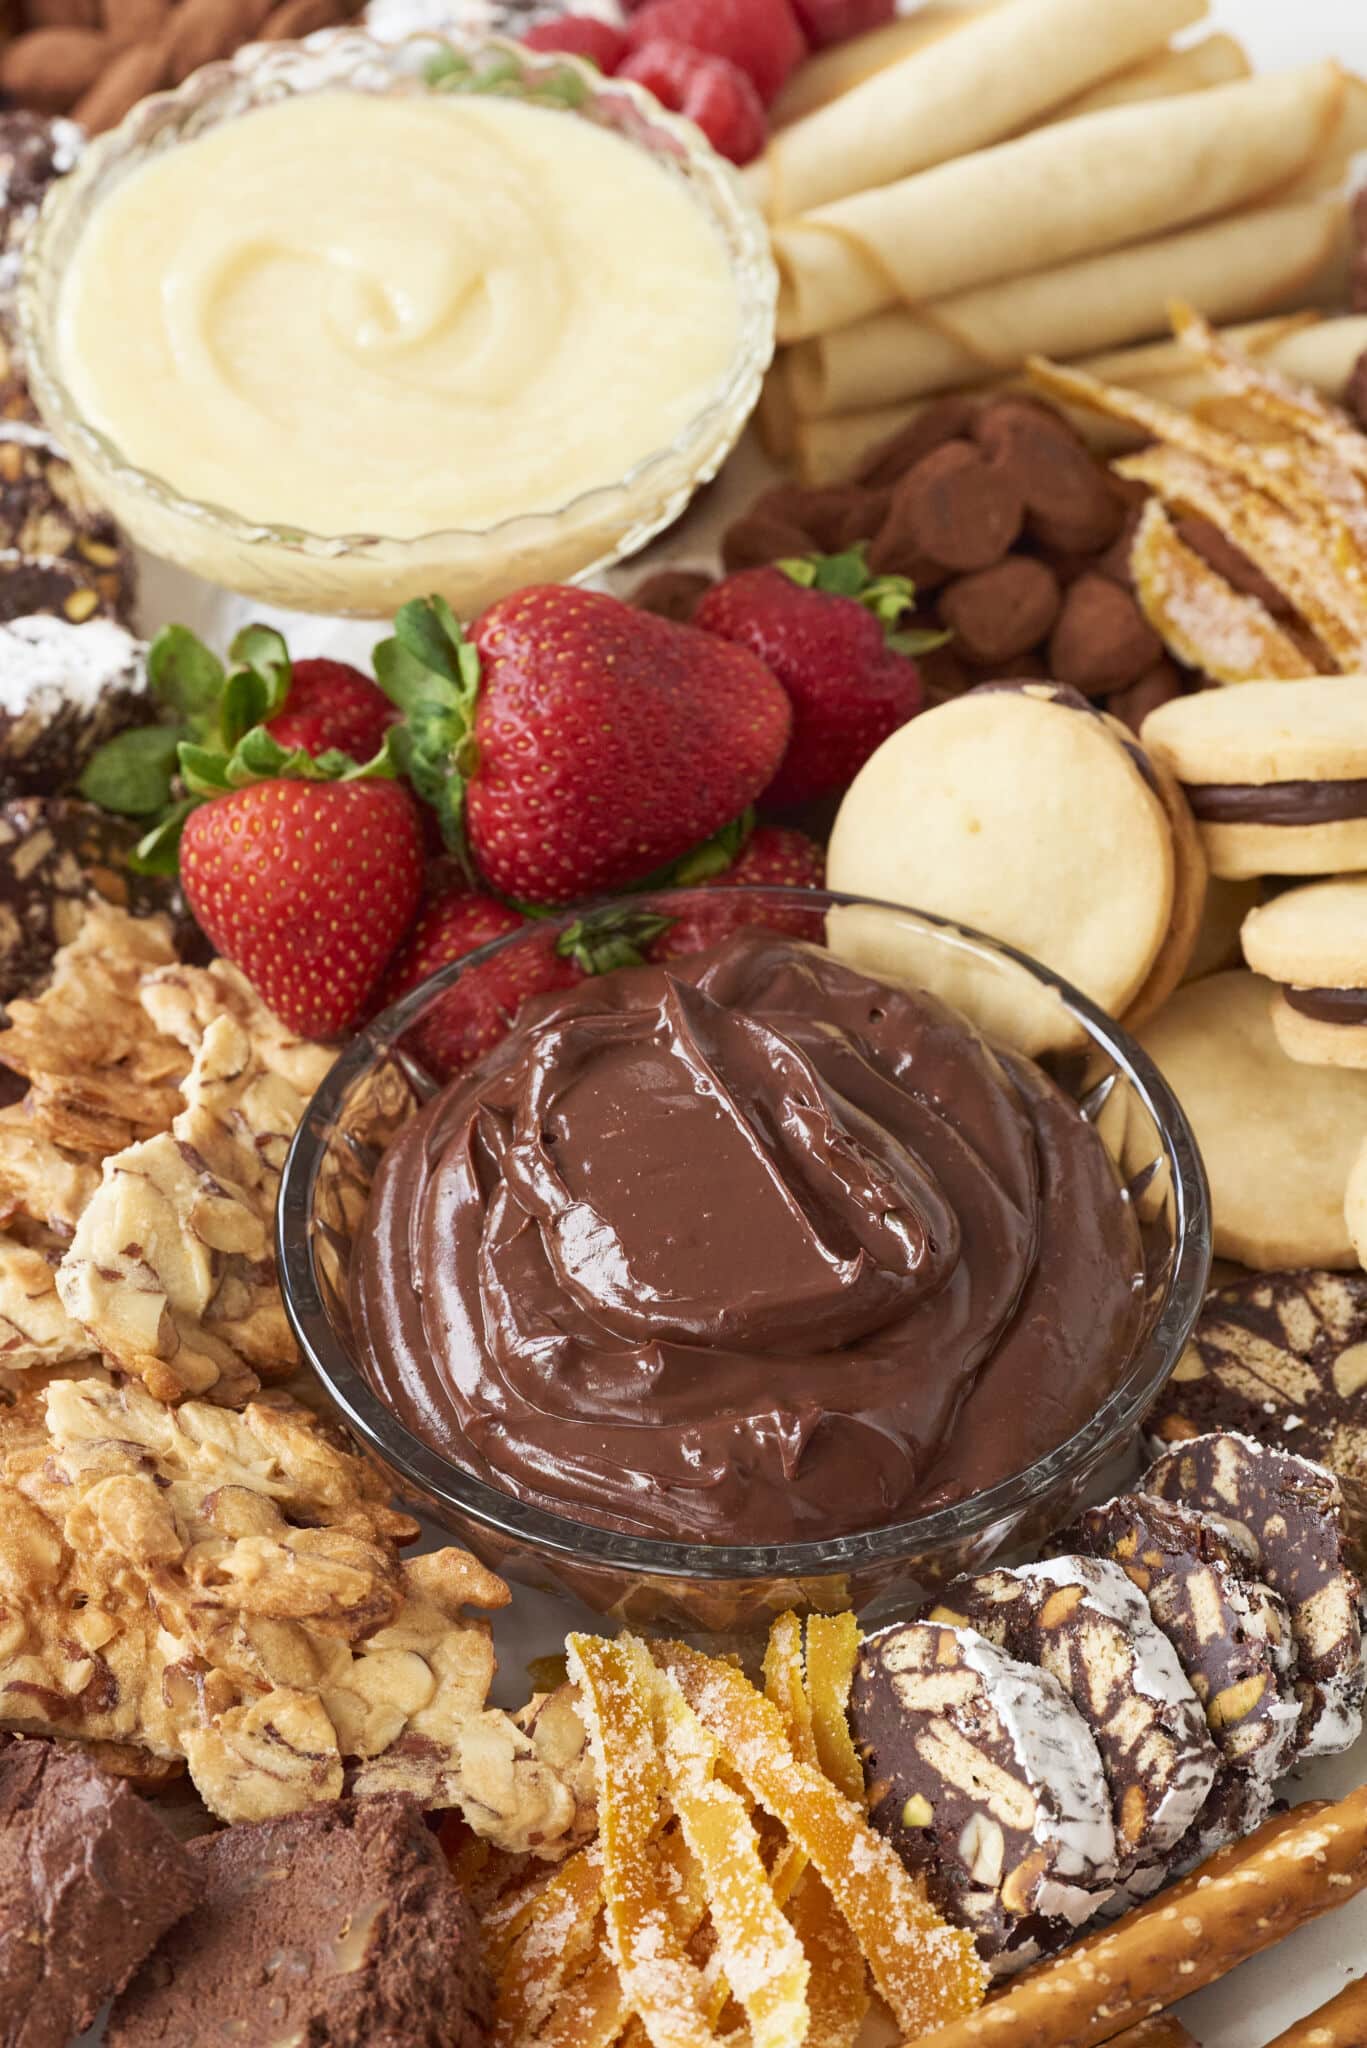 A close up of elements of the dessert charcuterie board including white chocolate ganache dip, chocolate ganache dip, strawberries, sandwich cookies, almond brittle, chocolate salami, and candied fruit.